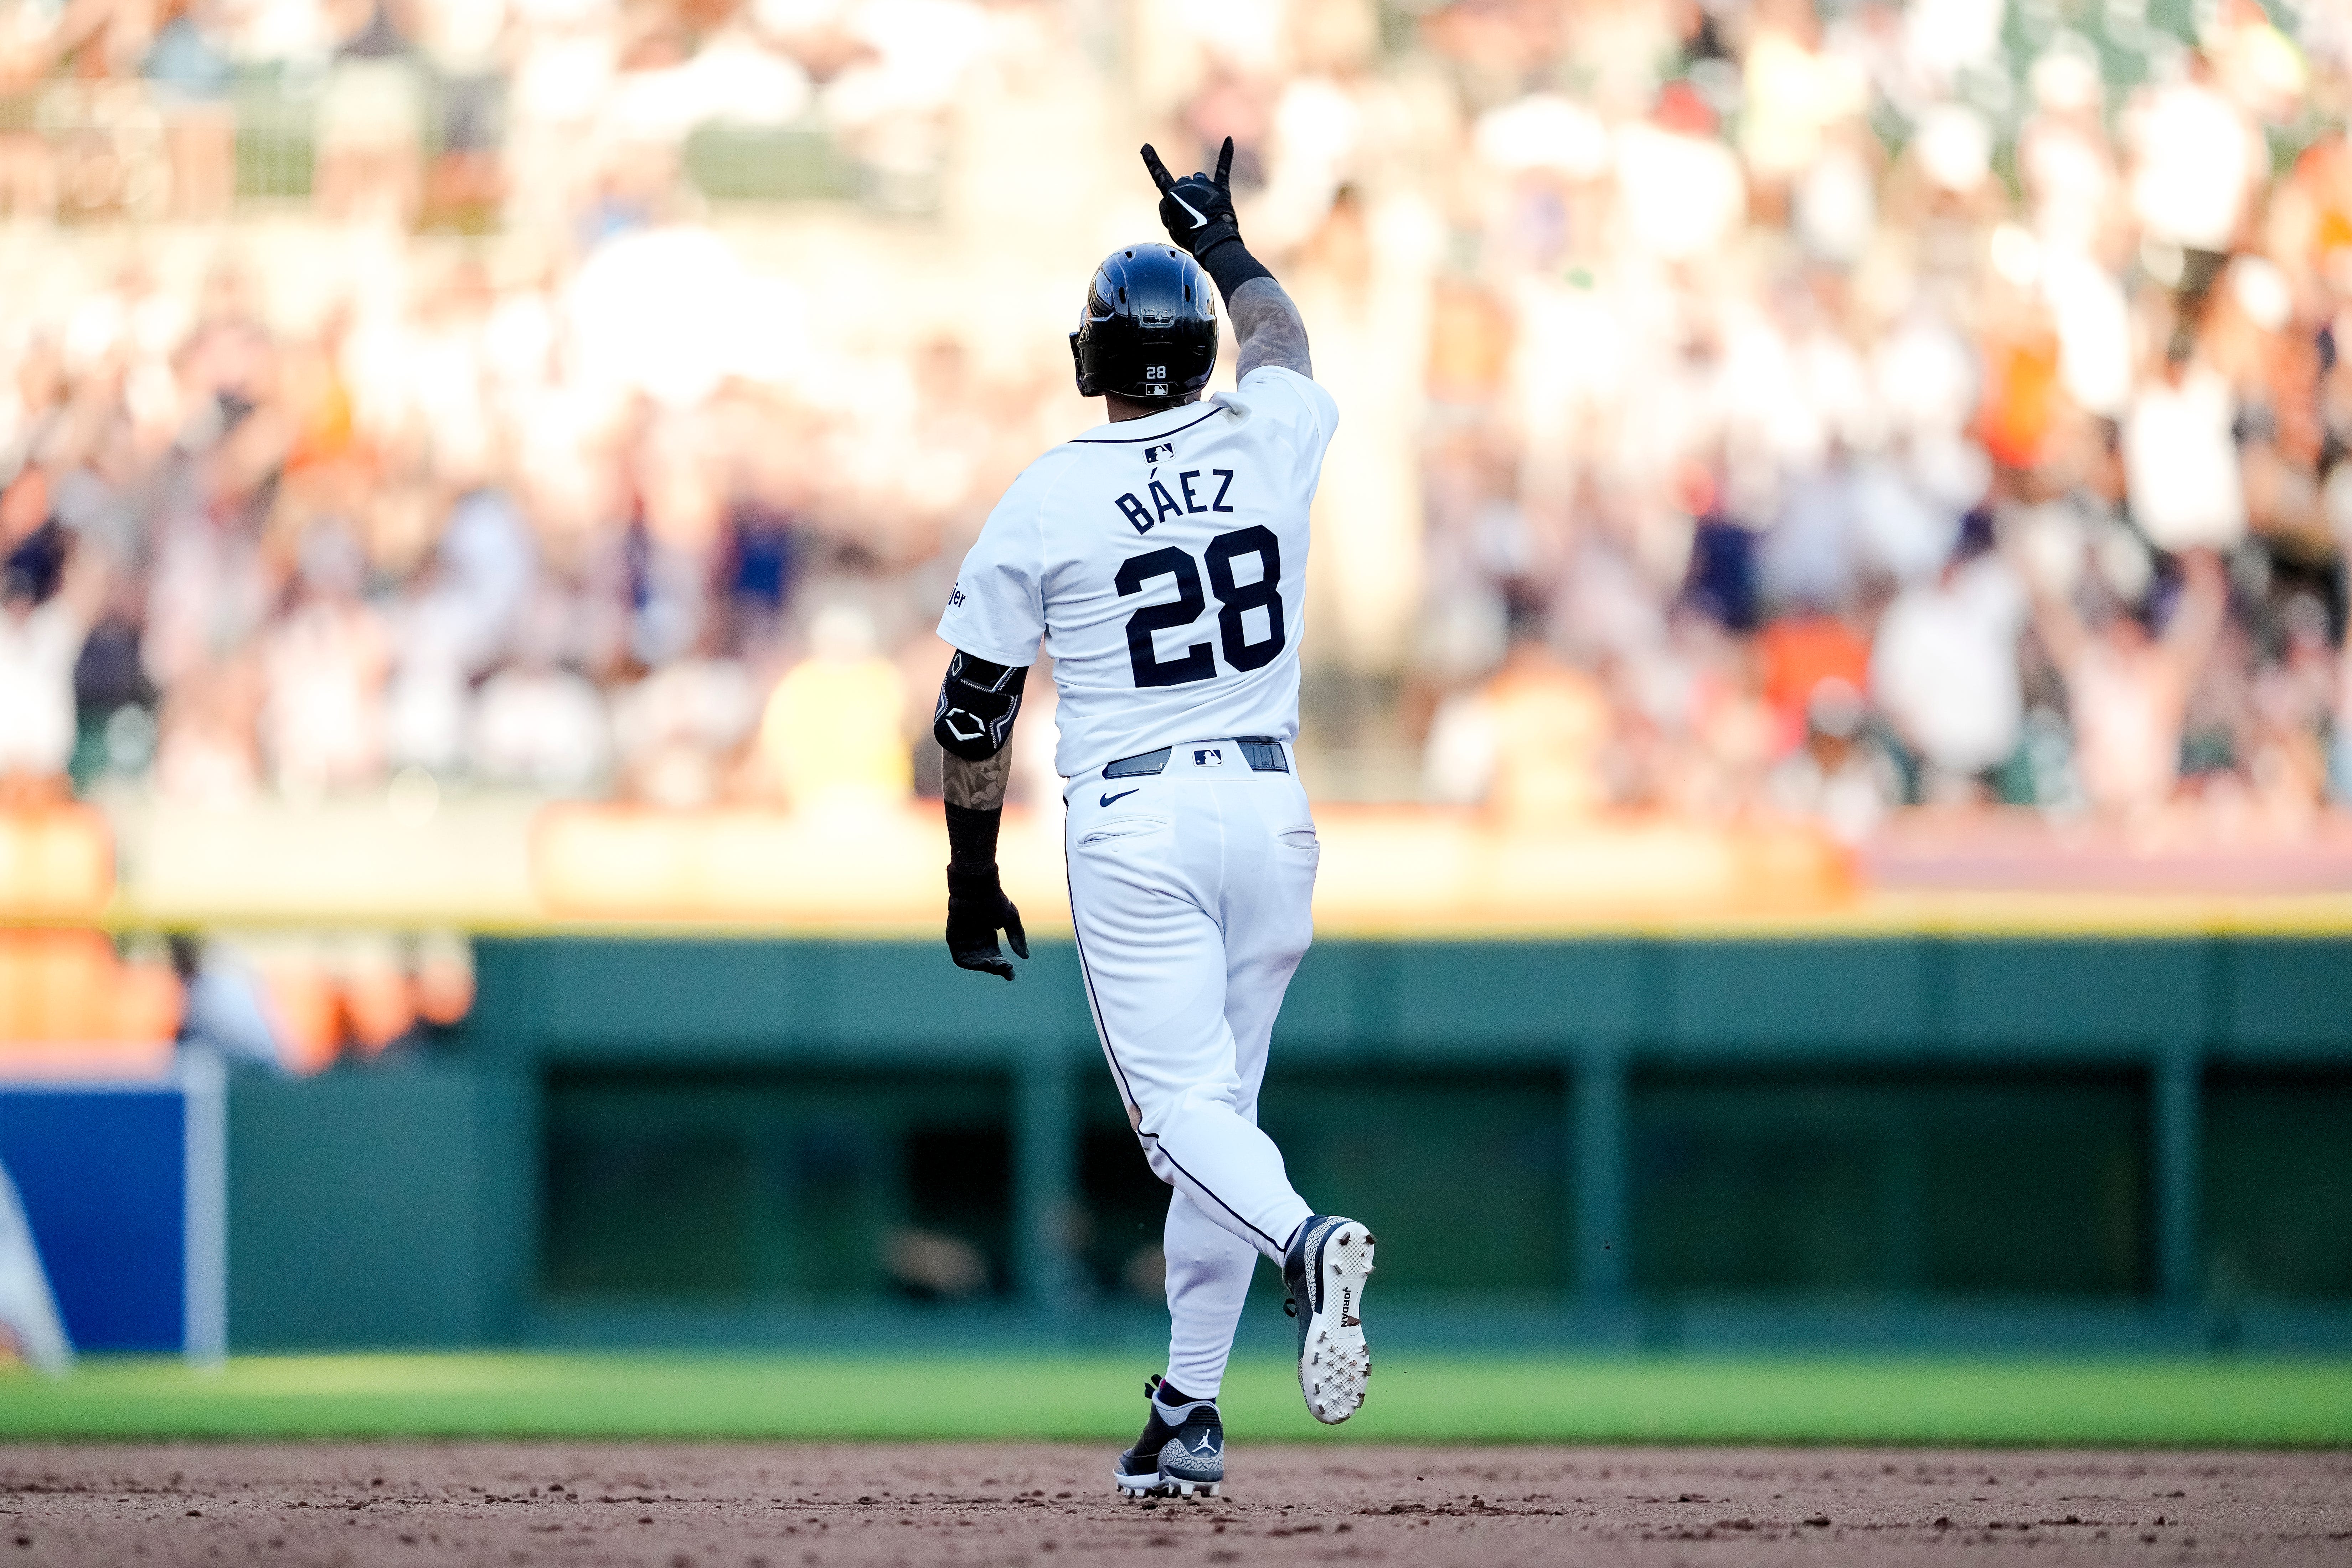 Detroit Tigers vs. Minnesota Twins: What time, TV channel is today's matinee on?